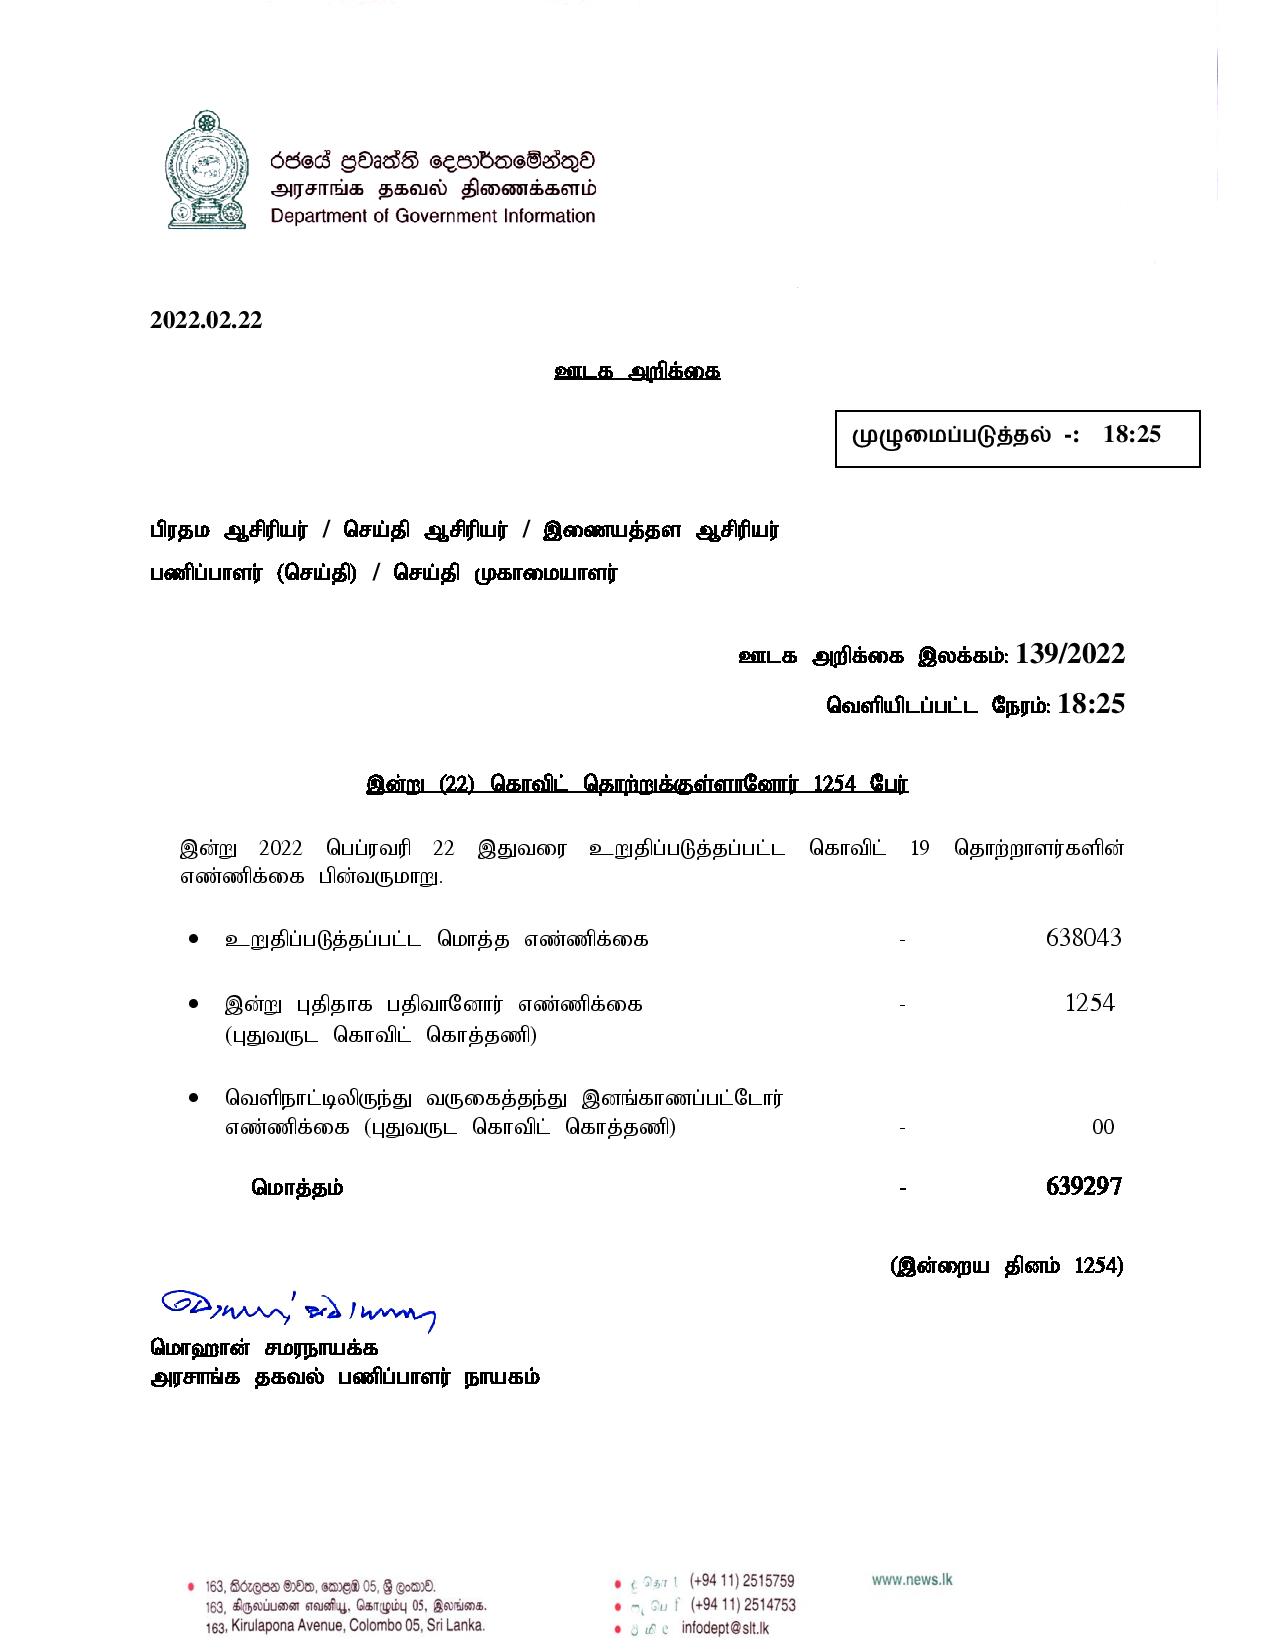 Press Release 139 Tamil page 001